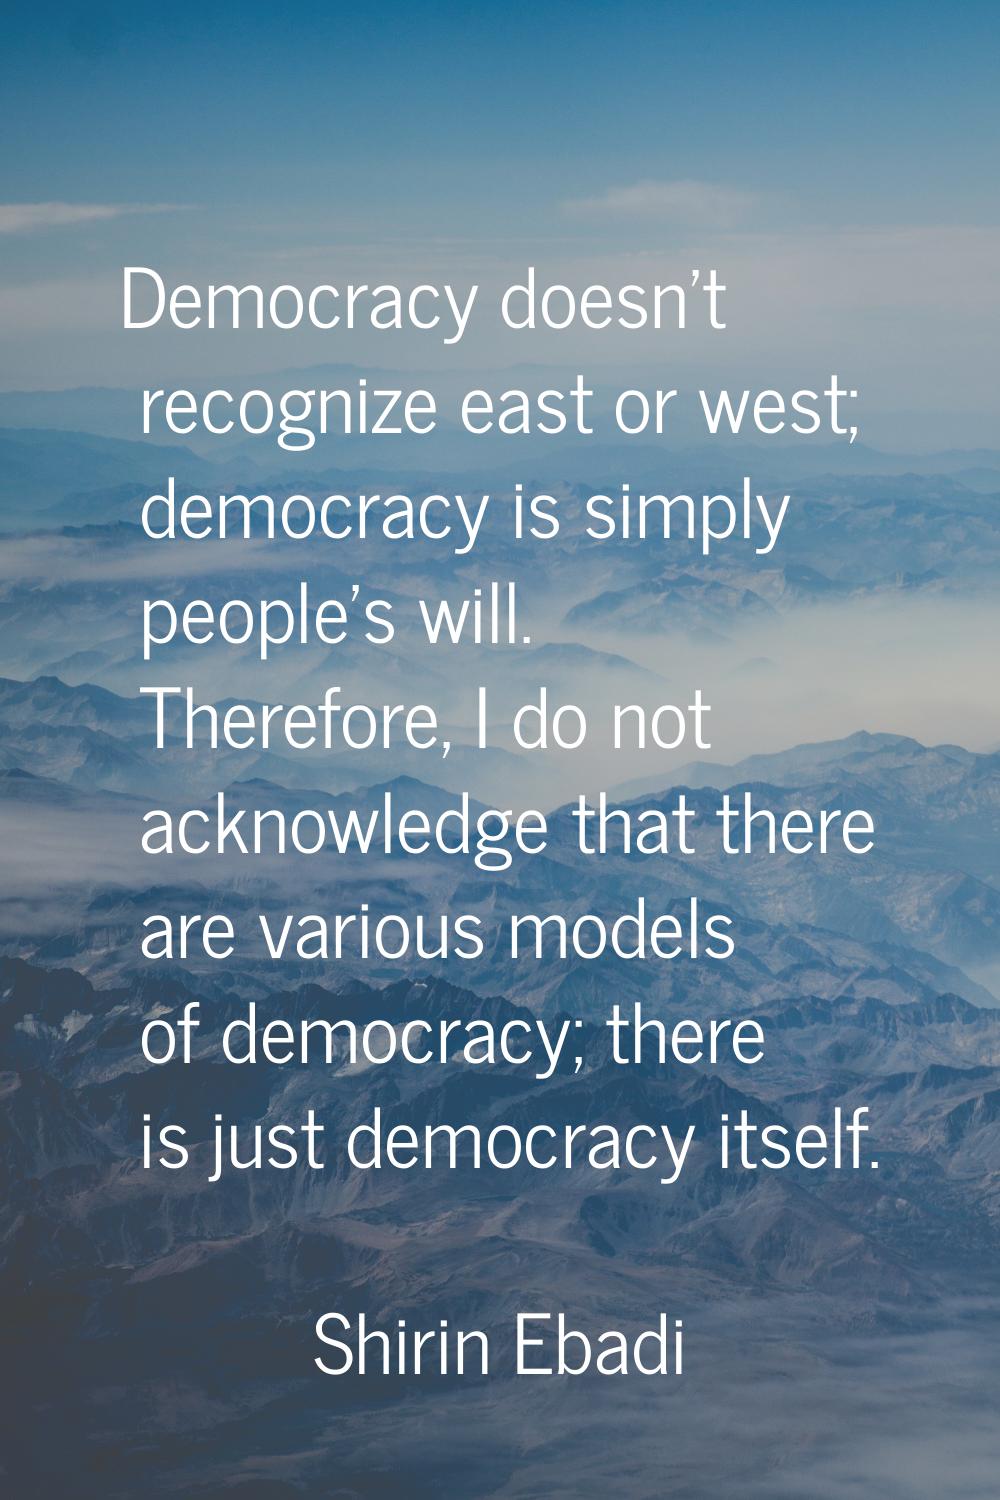 Democracy doesn't recognize east or west; democracy is simply people's will. Therefore, I do not ac